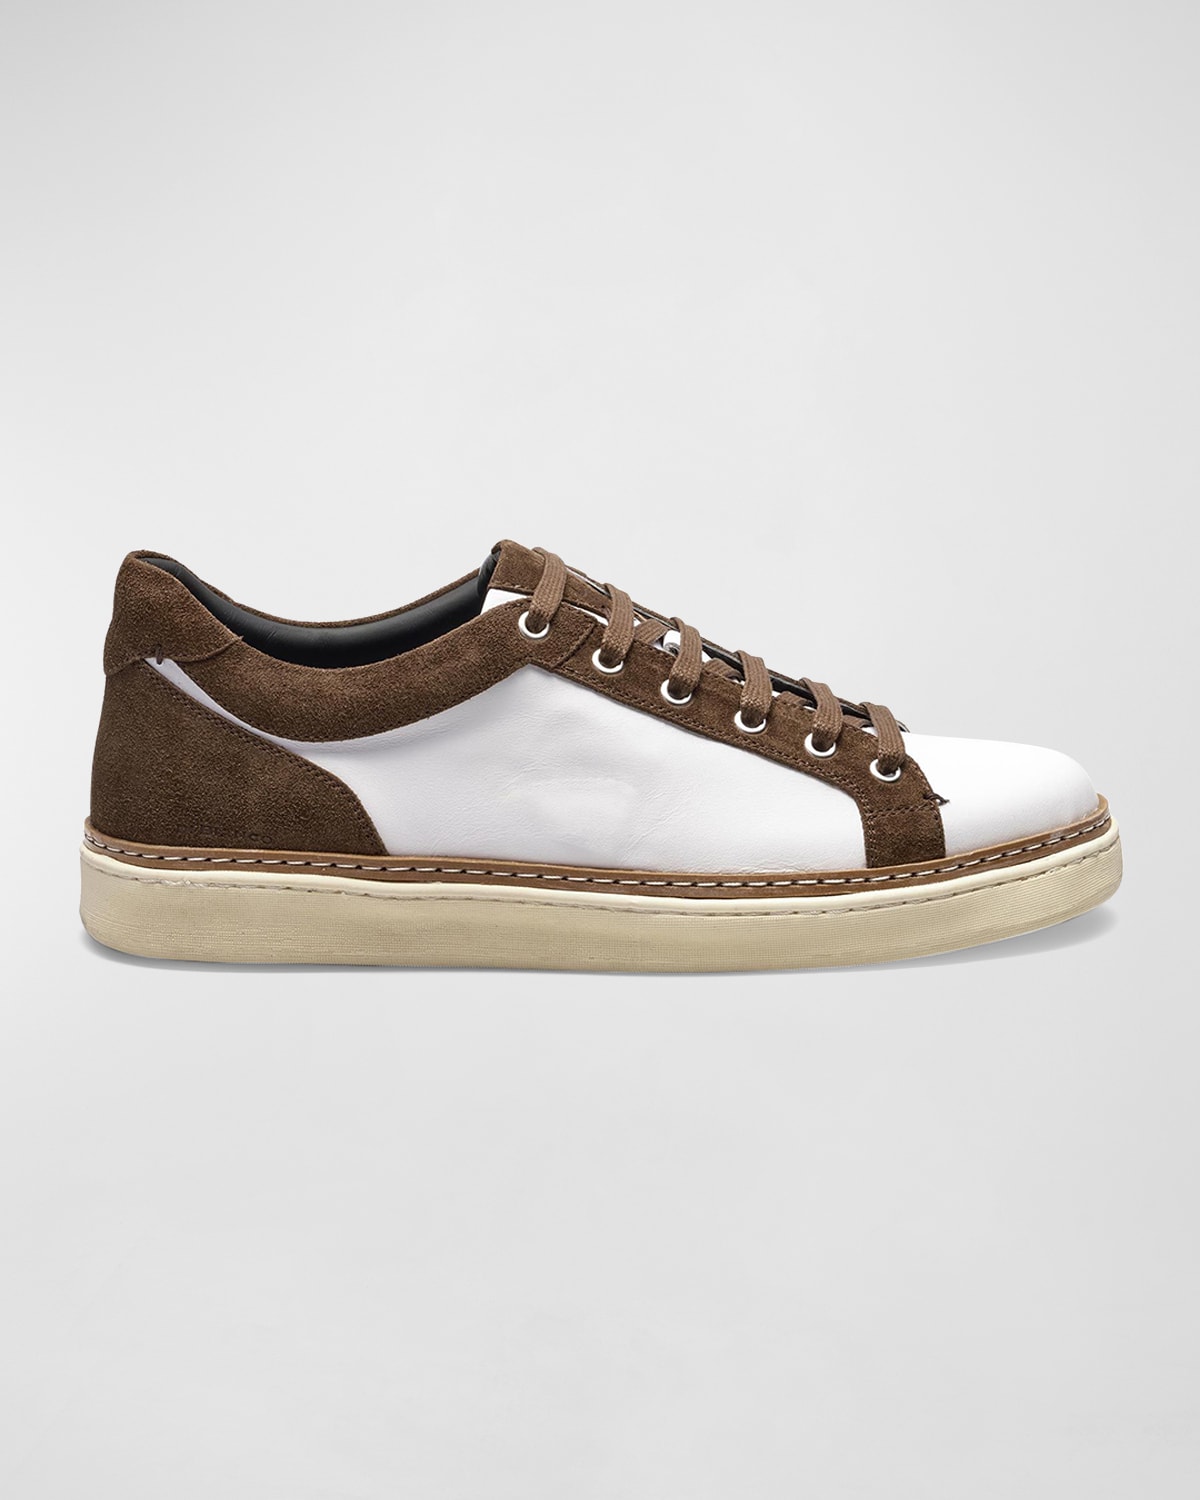 di Bianco Men's Binetto Mix-Leather Low-Top Sneakers